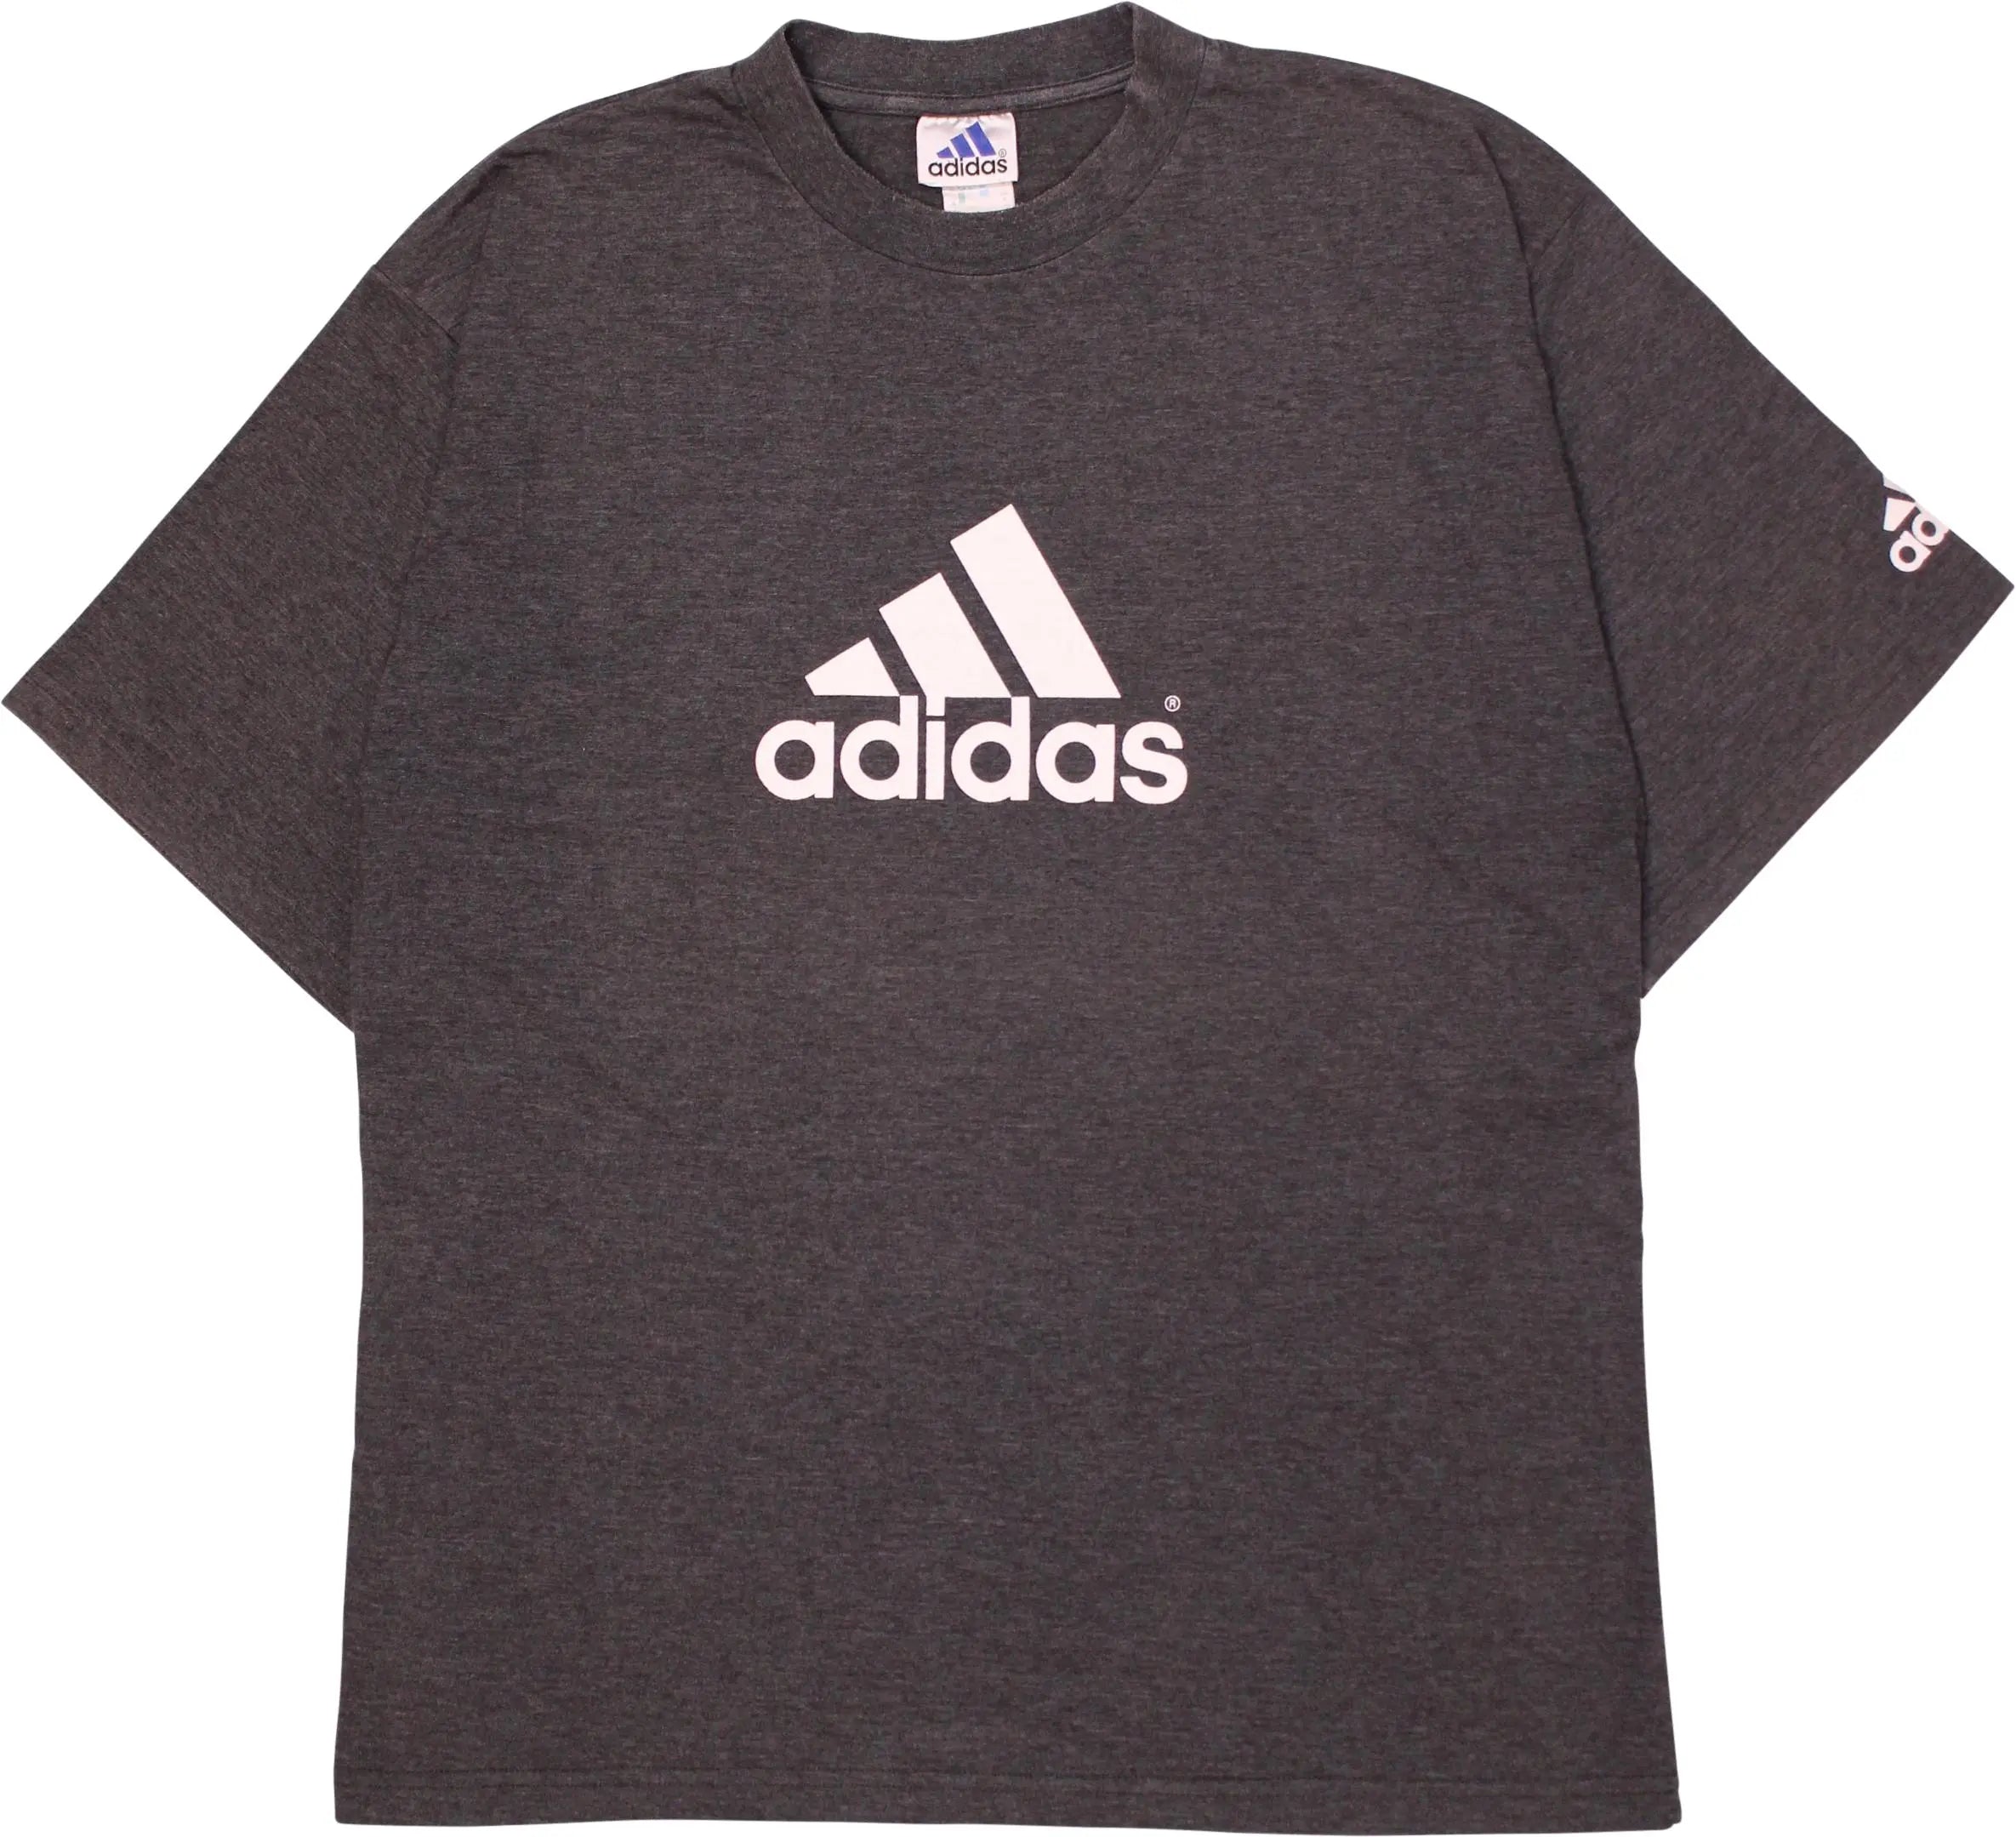 Adidas - 90s Grey T-shirt by Adidas- ThriftTale.com - Vintage and second handclothing